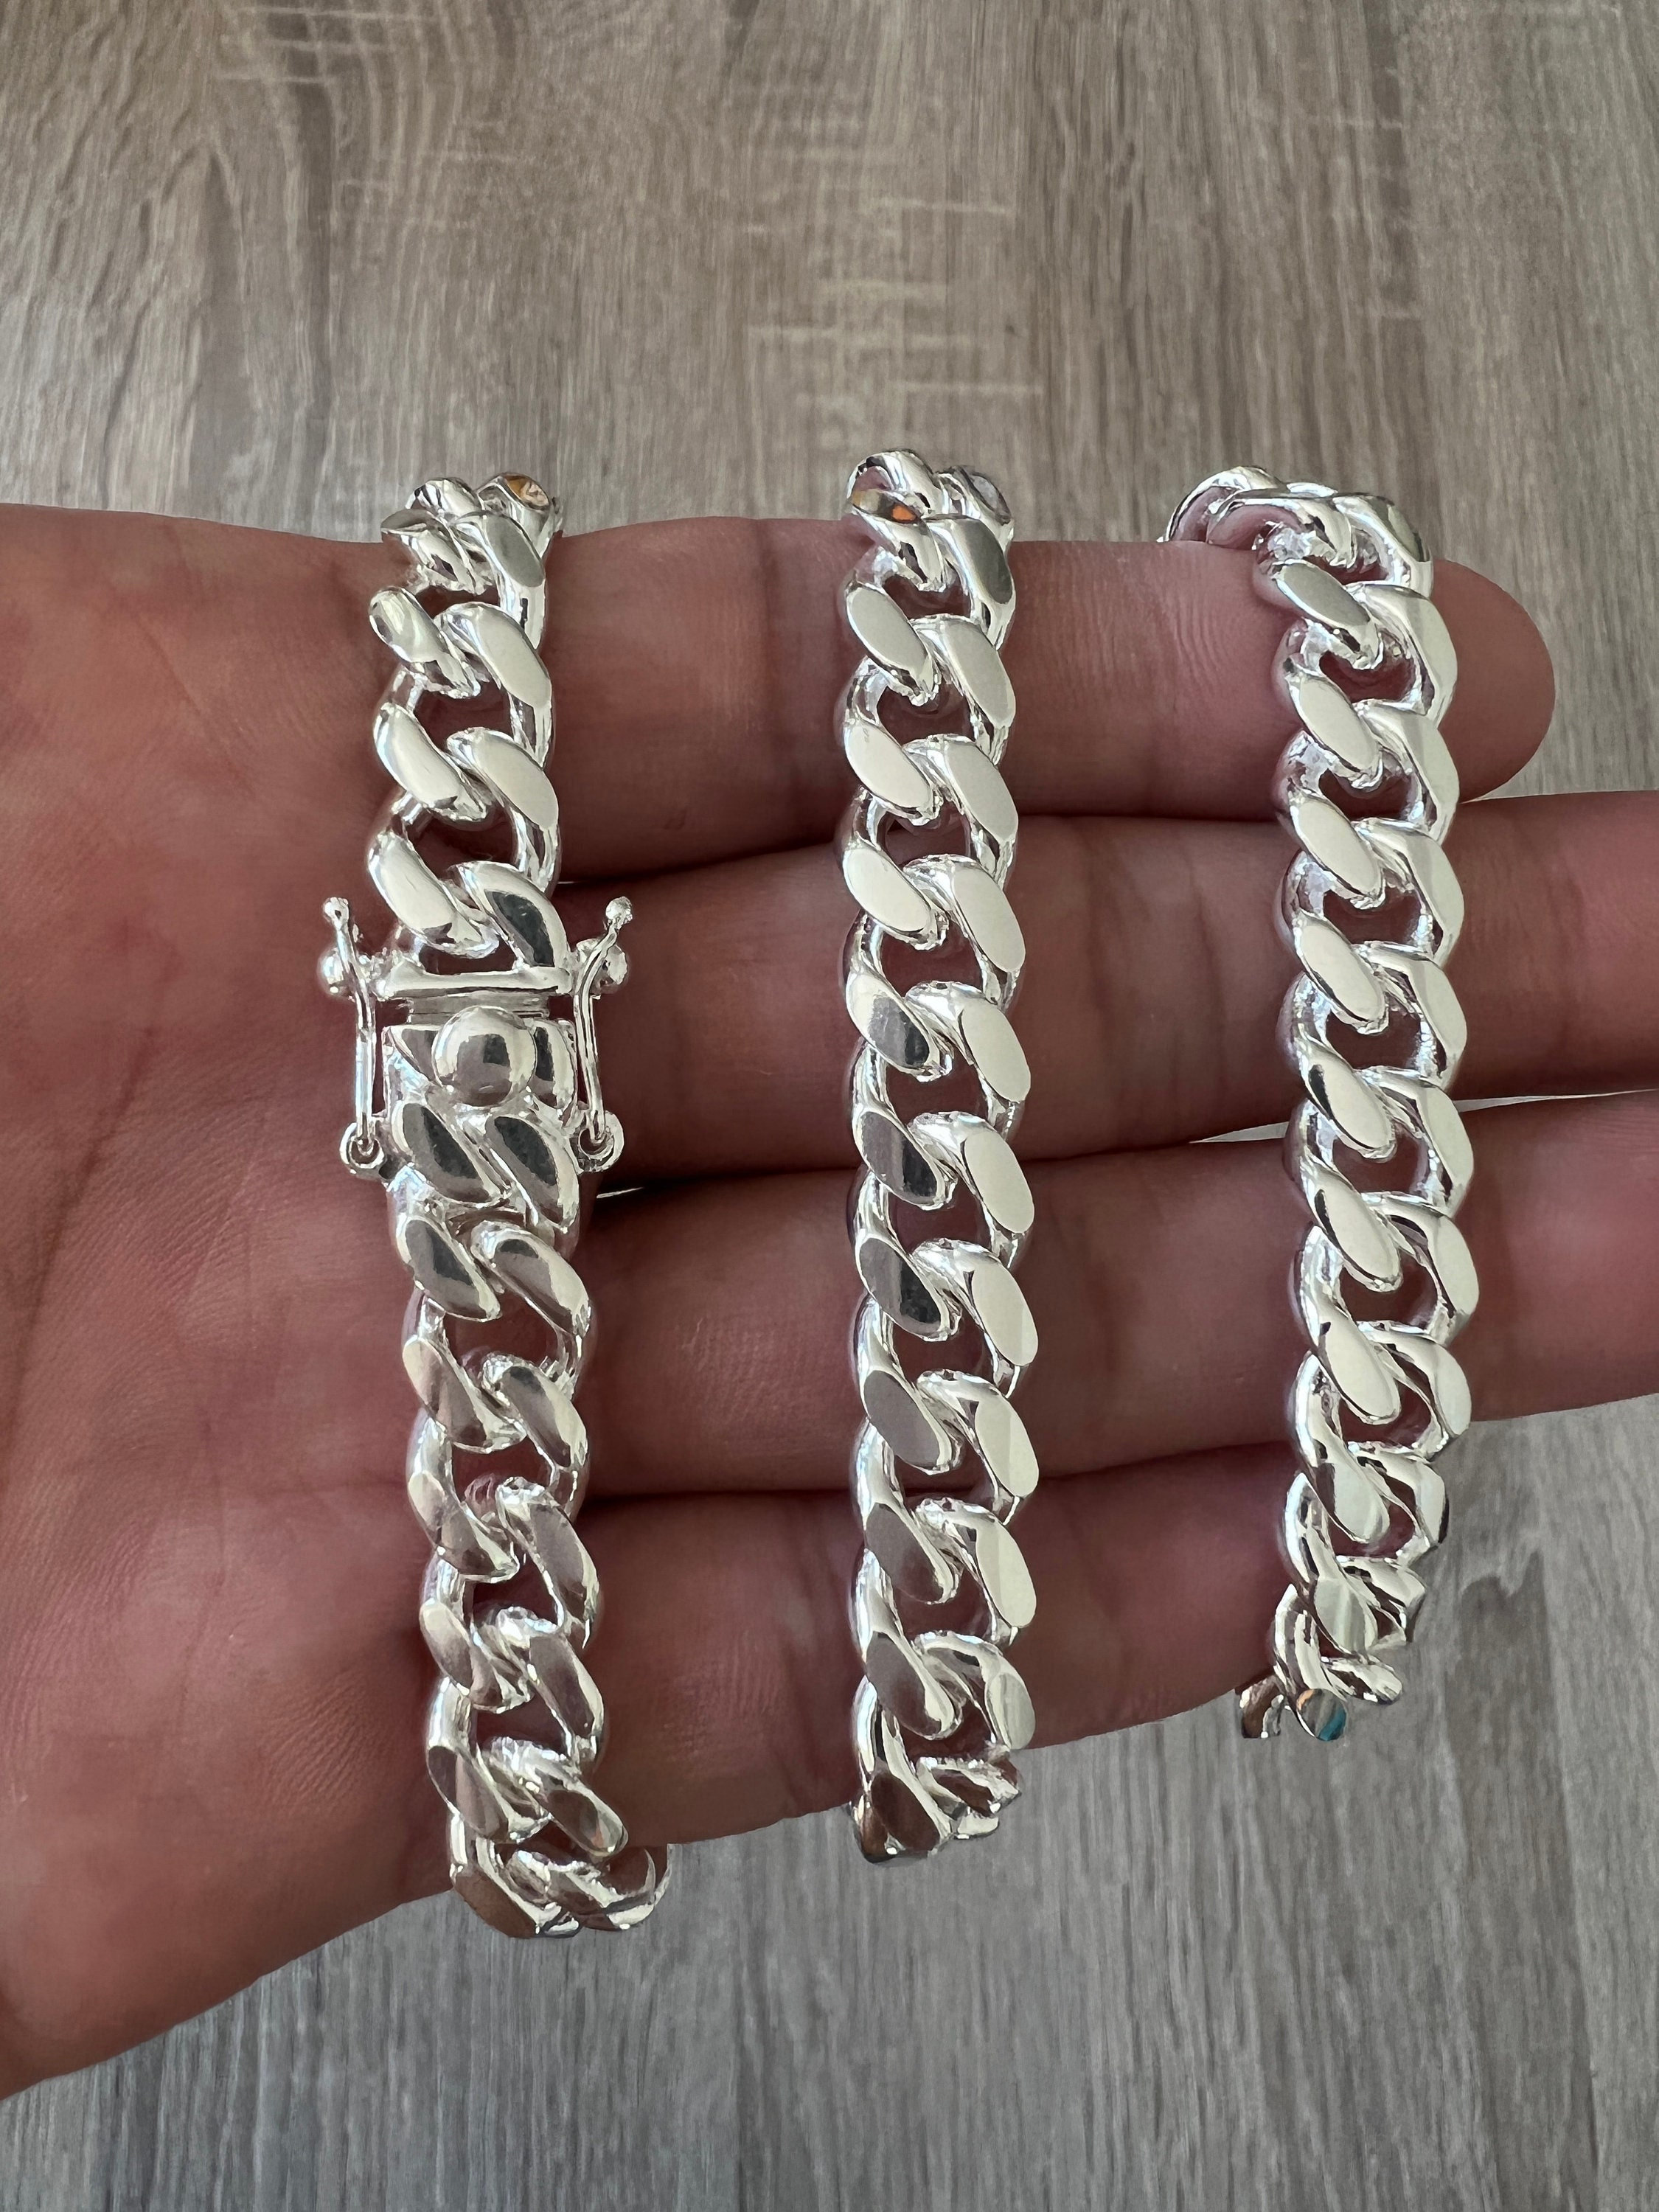 8mm Stainless Steel Cuban Link Chain and Bracelet M (7.5-8) / Black